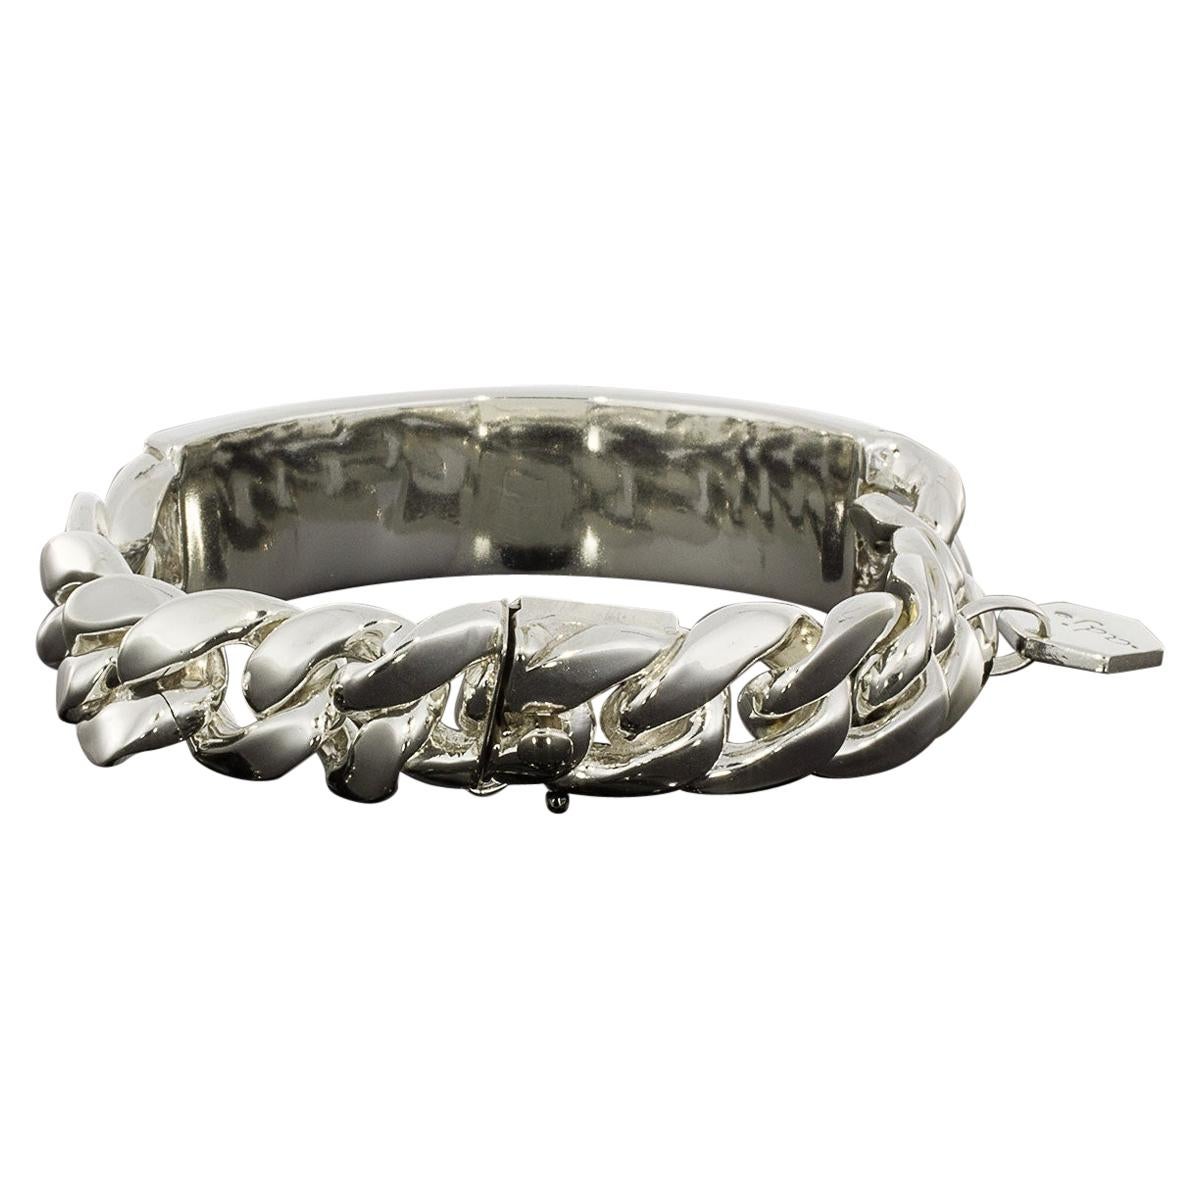 Item Details
Estimated Retail $2,800.00
Brand Ann Dexter Jones
Collection ID
Metal Sterling Silver
Finish Polished
Style Id/Identification
Width 16.20 mm
Fastening Box
Bracelet Length8.00 in
Metal Purity 925 Parts Per 1000